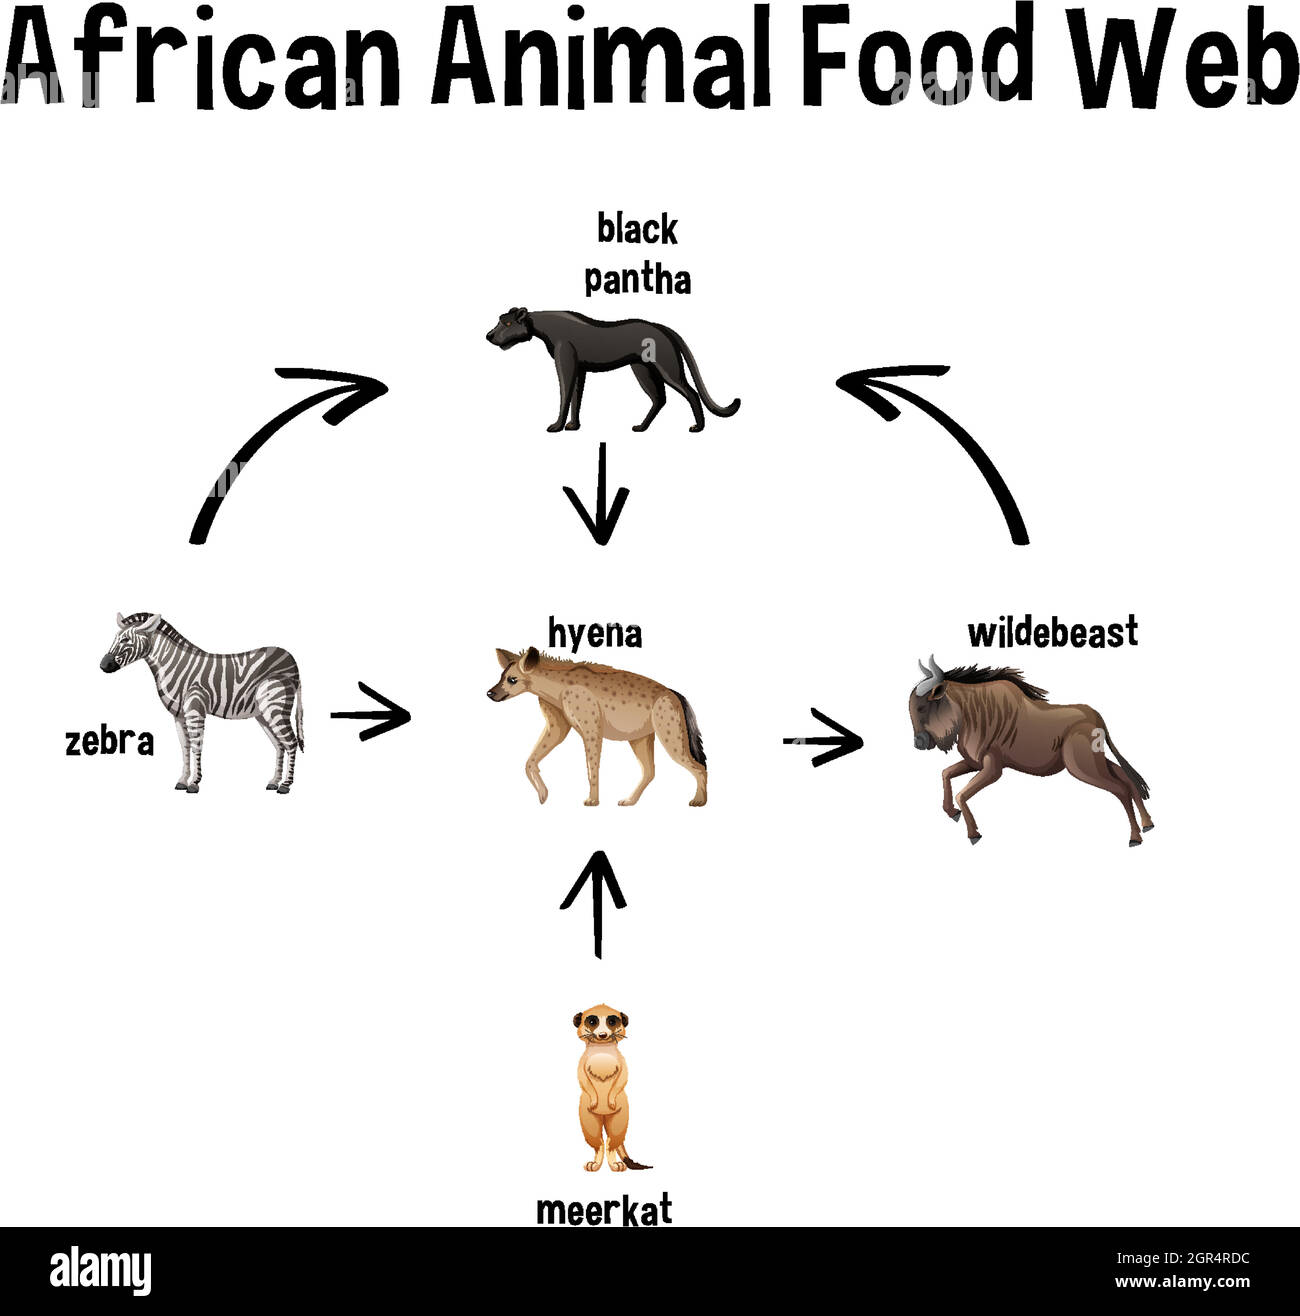 African Animal Food Web for education Stock Vector